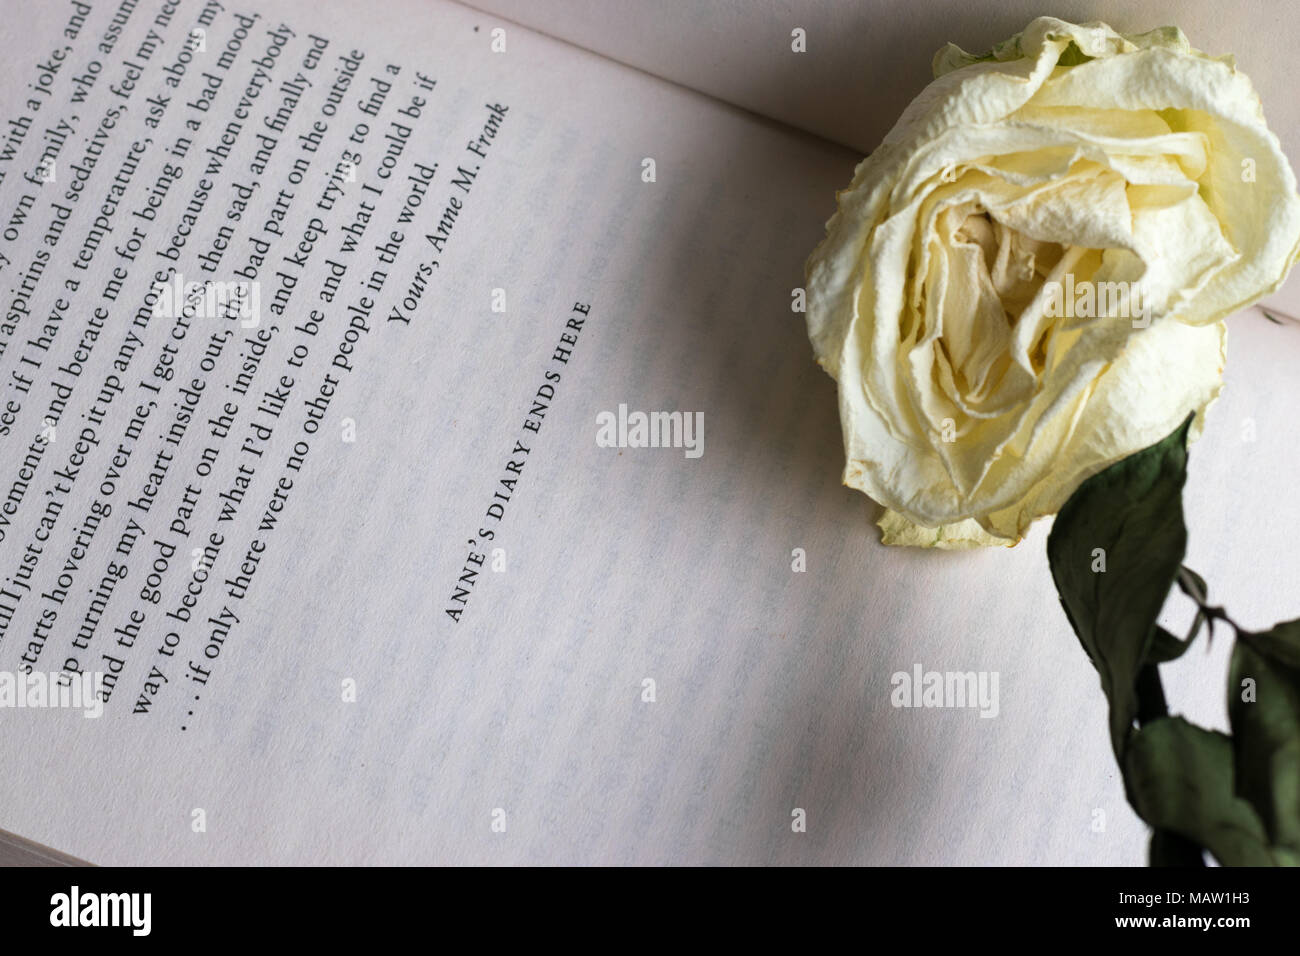 Last page of 'The Diary of a Young Girl' by Anne Frank, showing the words " Anne's diary ends here" with a withered white rose placed on the book Stock  Photo - Alamy